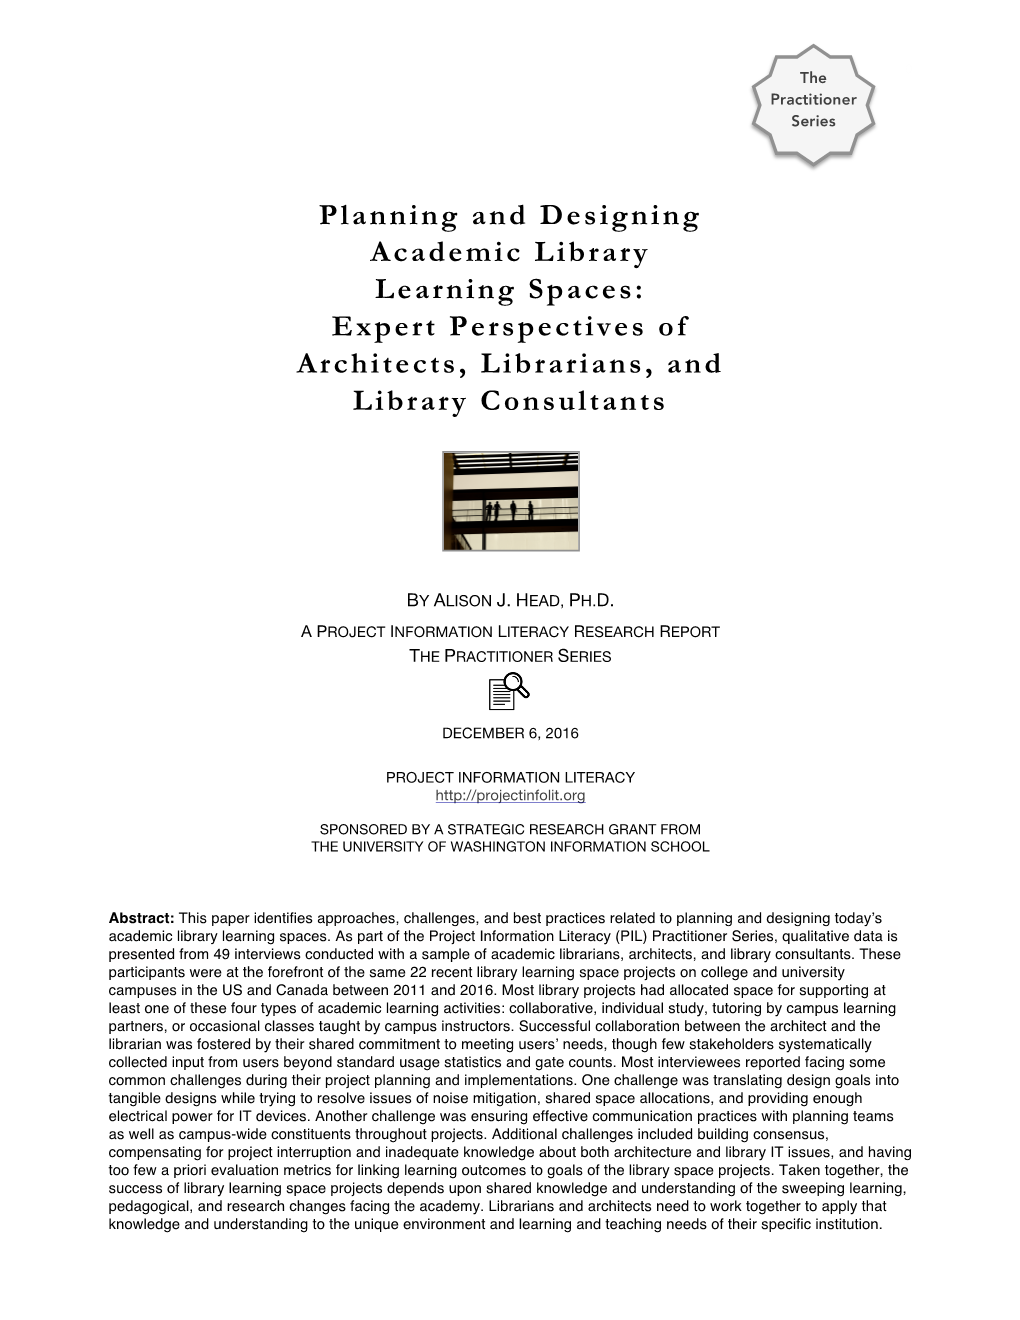 Planning and Designing Academic Library Learning Spaces: Expert Perspectives of Architects, Librarians, and Library Consultants